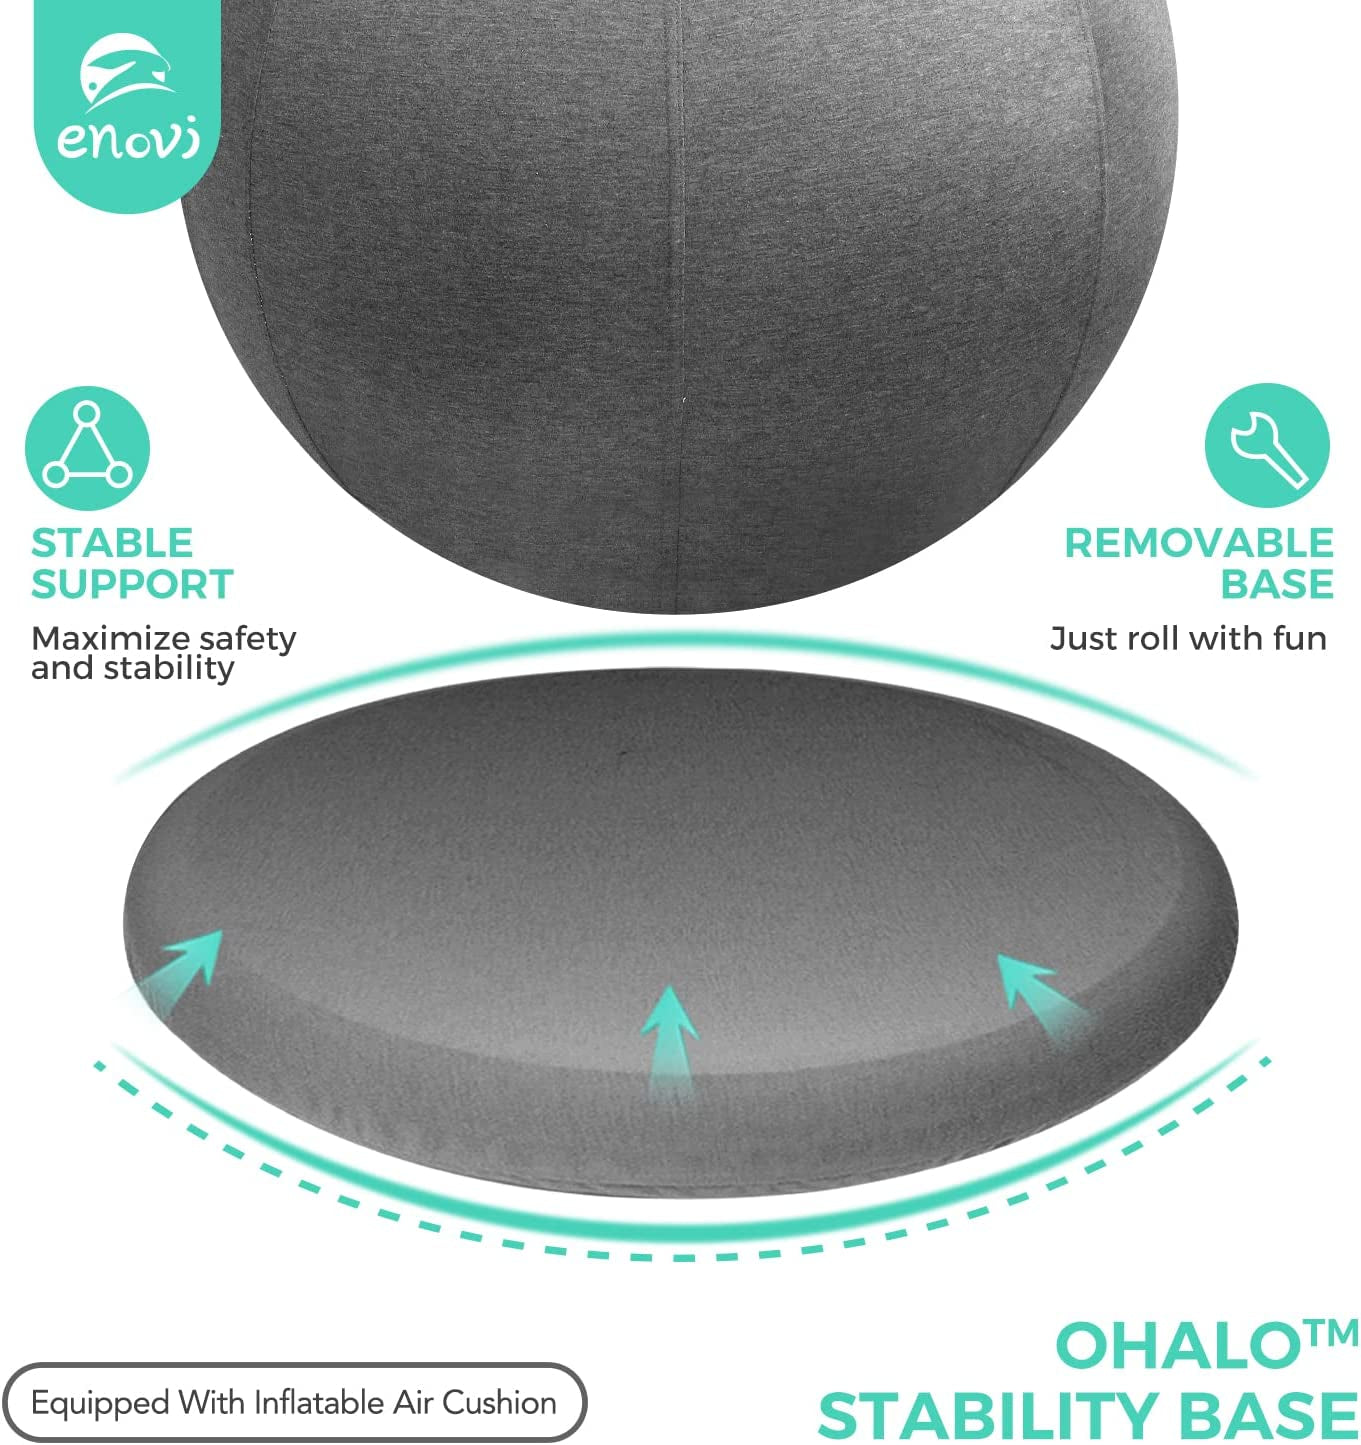 "Pro Balance Ball Chair: Optimize Comfort and Support for Work, Yoga, and Pregnancy. Stylish, Ergonomic Design with Slipcover and Stable Base. Relieve Back Pain and Embrace a Healthier, Active Lifestyle. Multiple Color and Size Options Available."